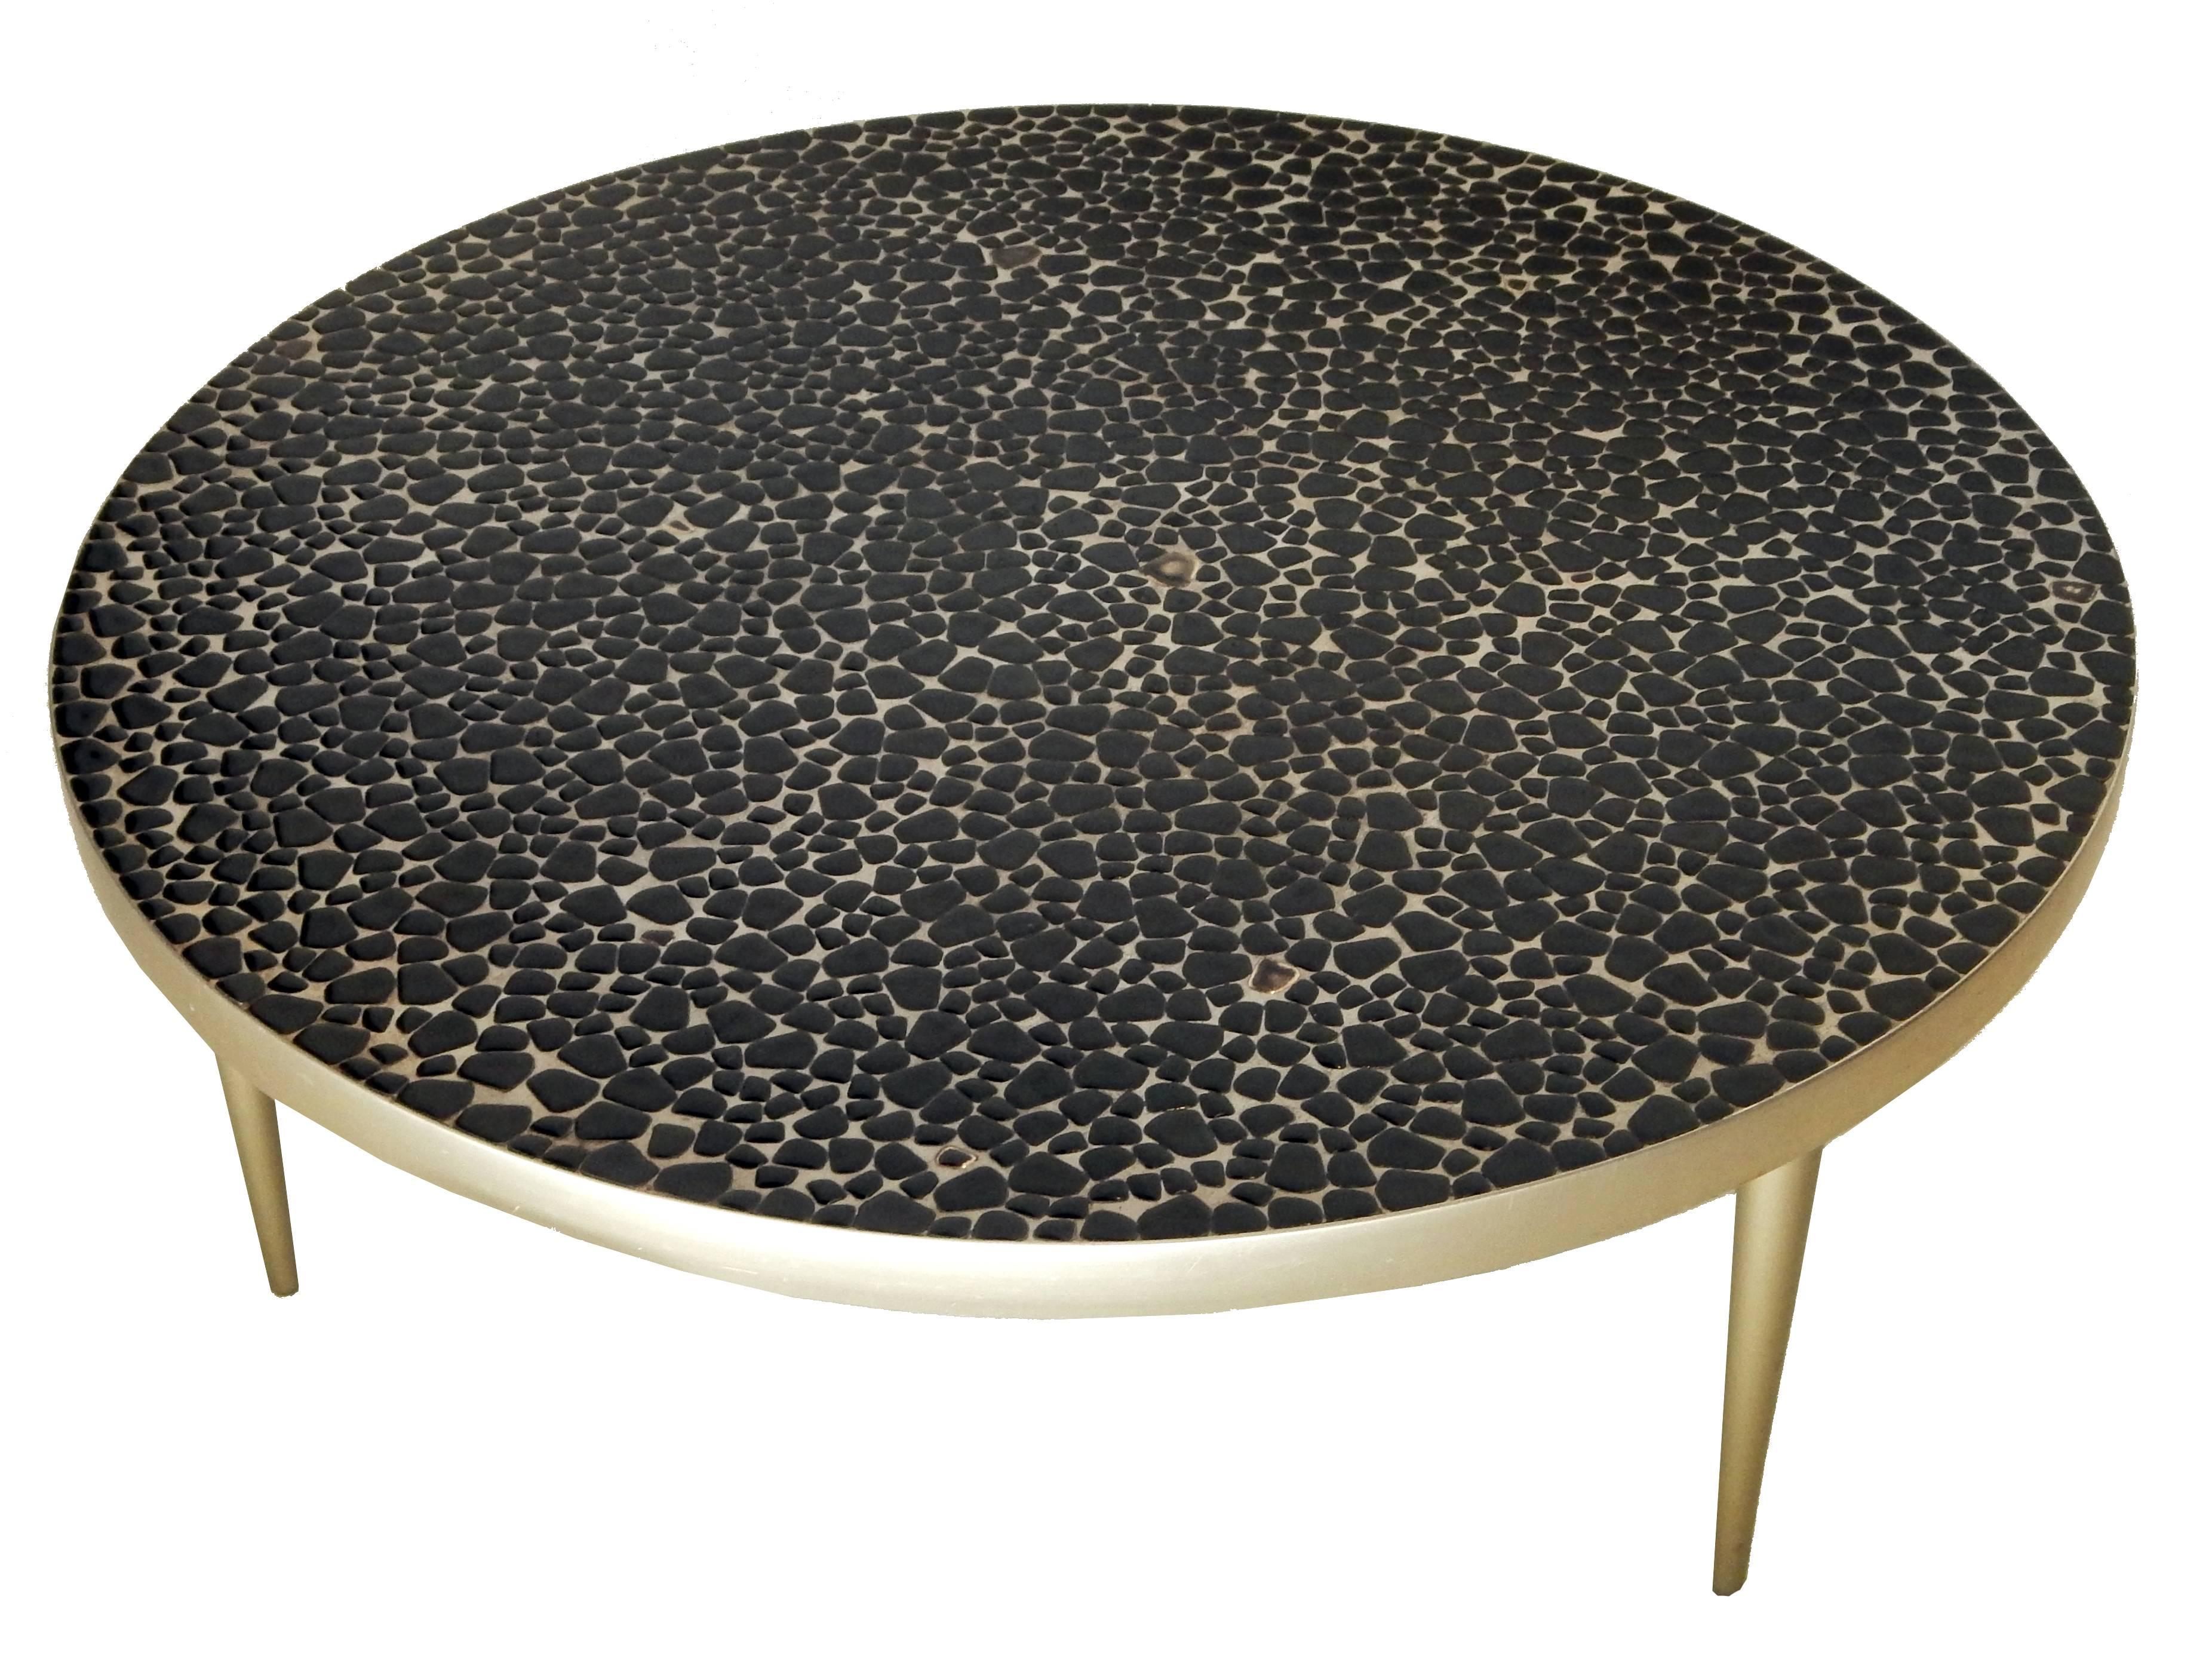 Round mosaic tile Mid-Century coffee table with brushed aluminum legs.